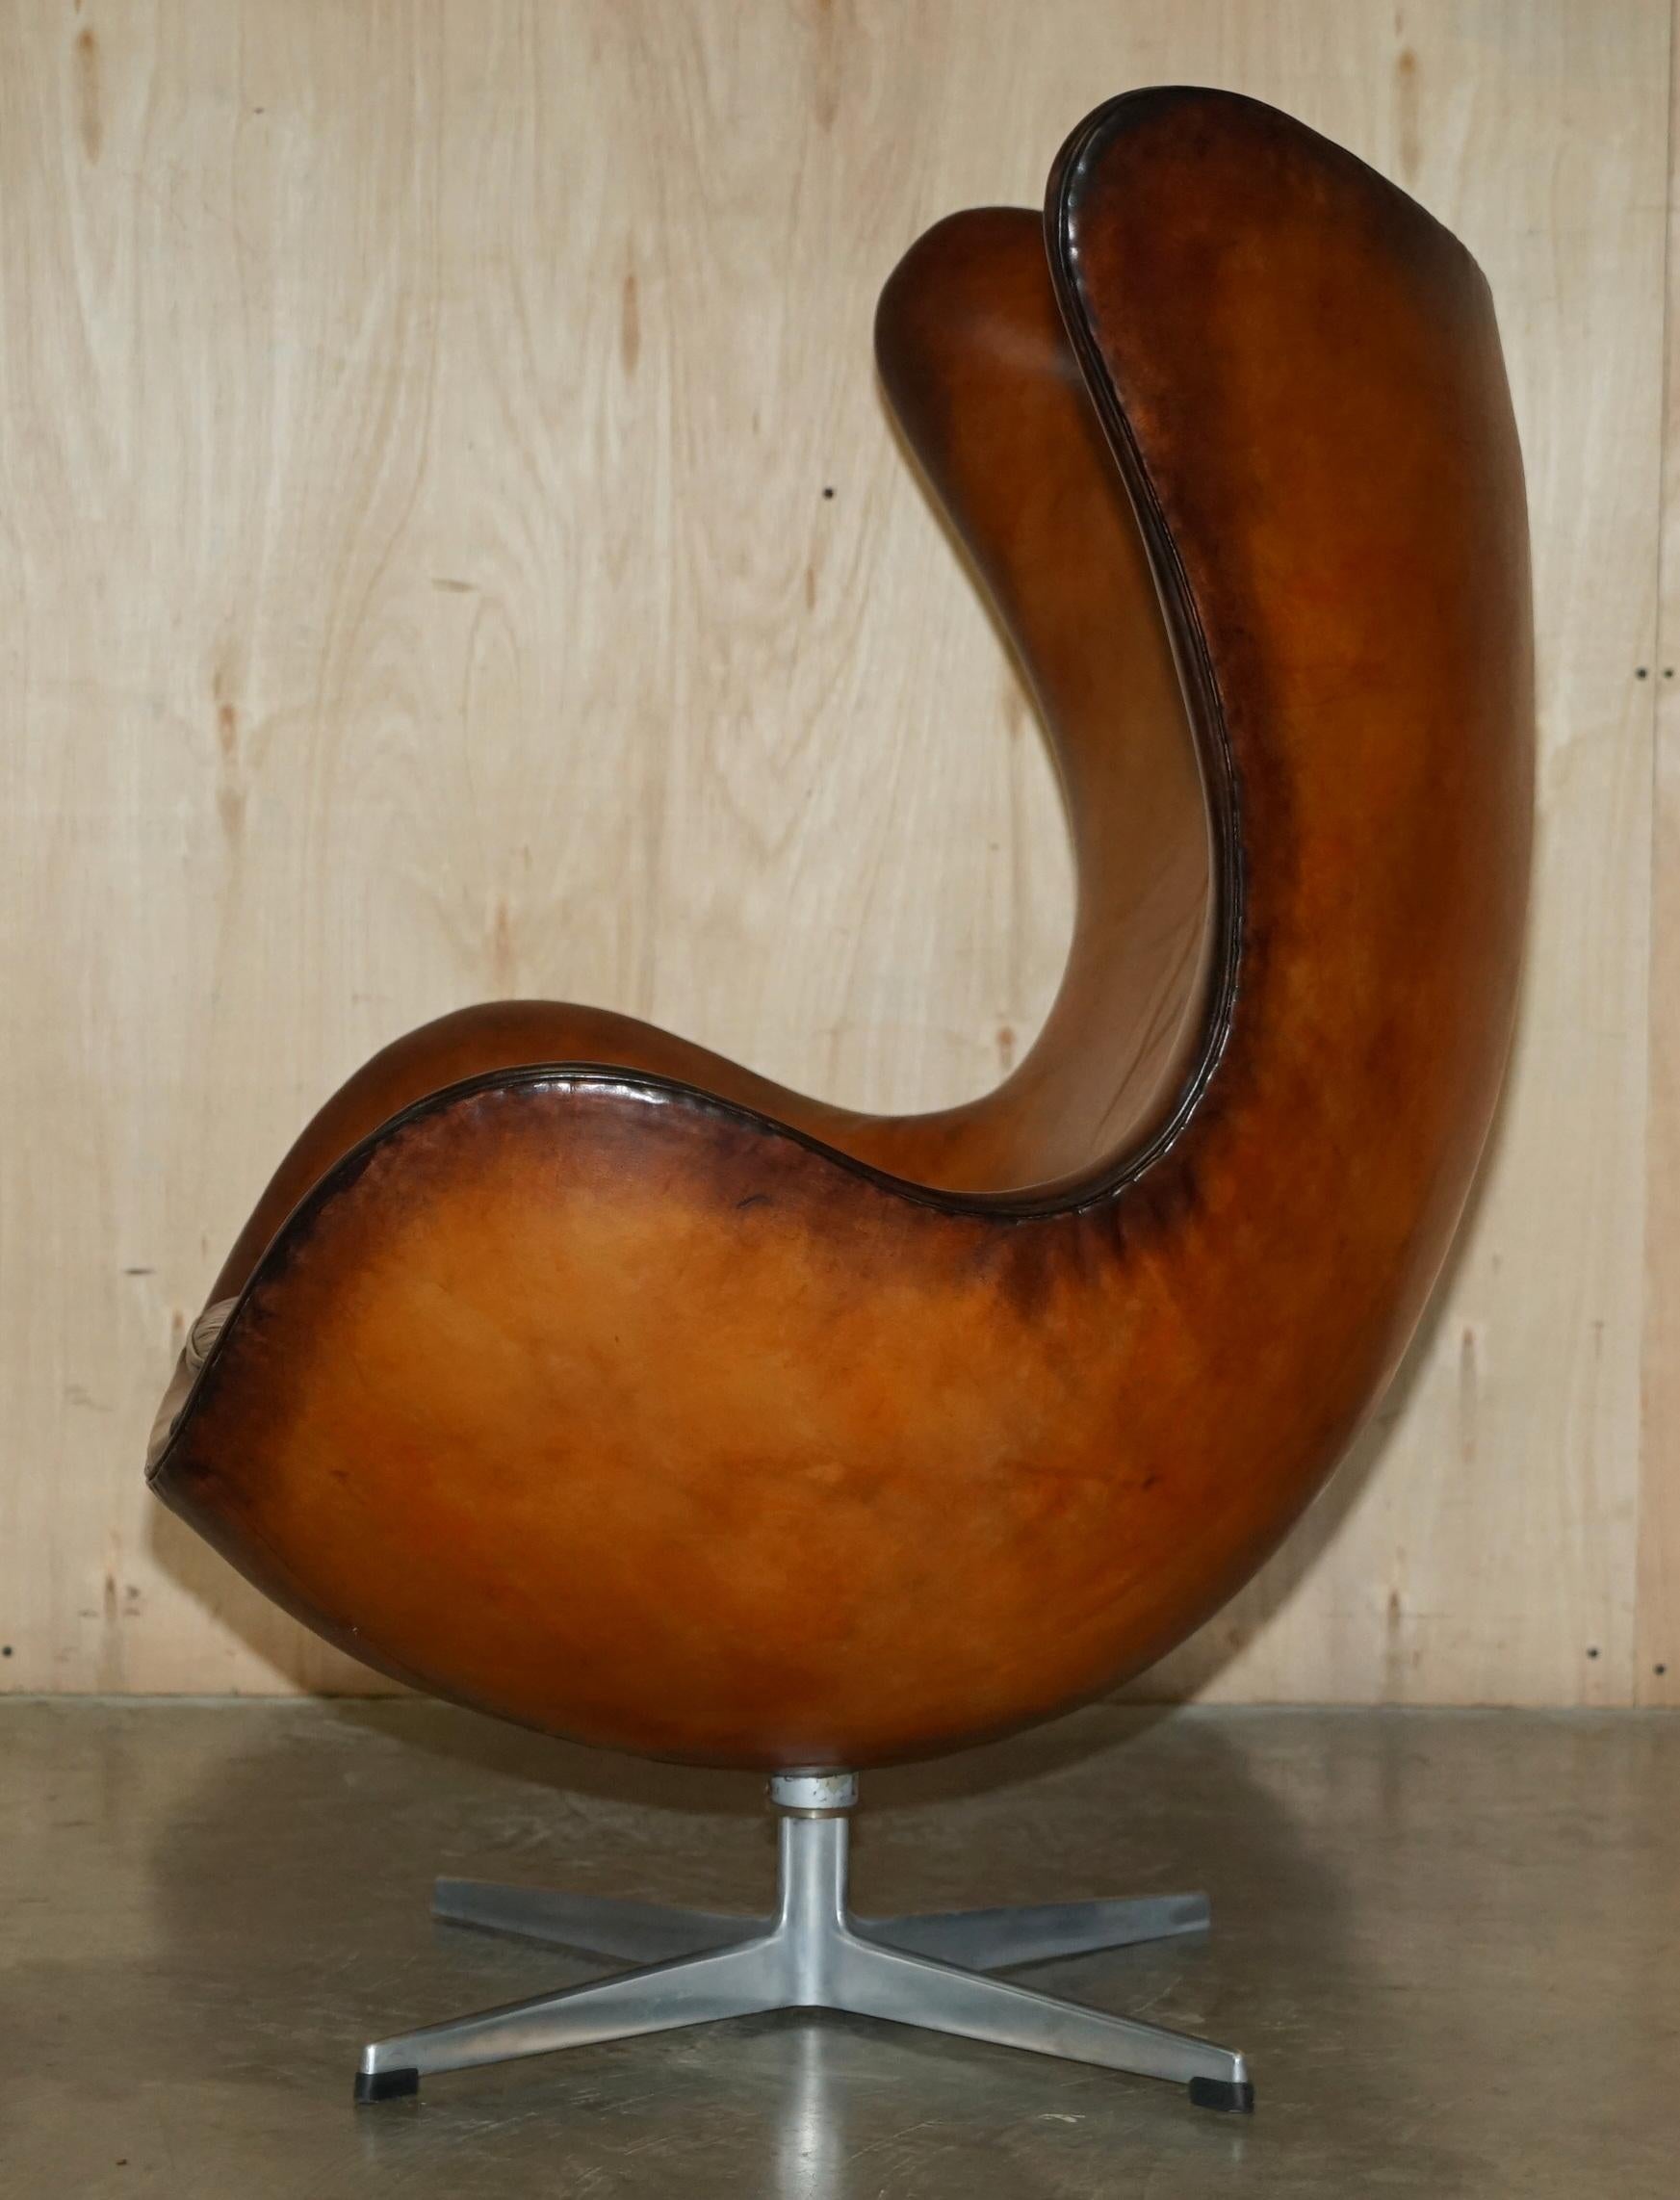 ORIGINAL FULLY RESTORED 1968 FRITZ HANSEN EGG CHAiR & FOOTSTOOL IN BROWN LEATHER For Sale 4